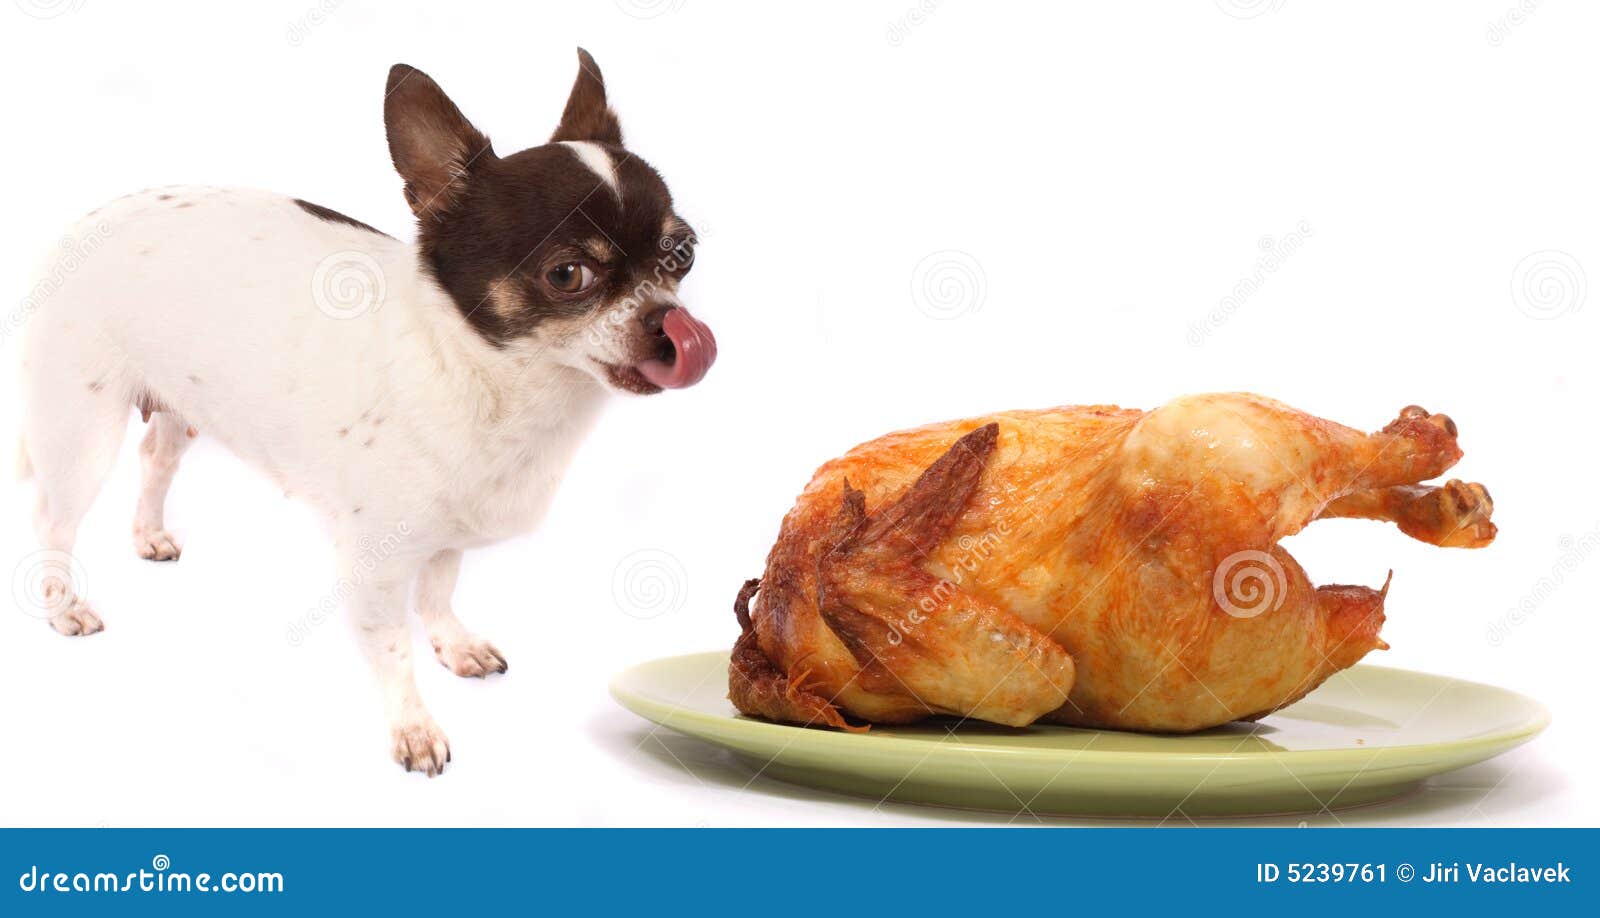 are turkey bad for dogs